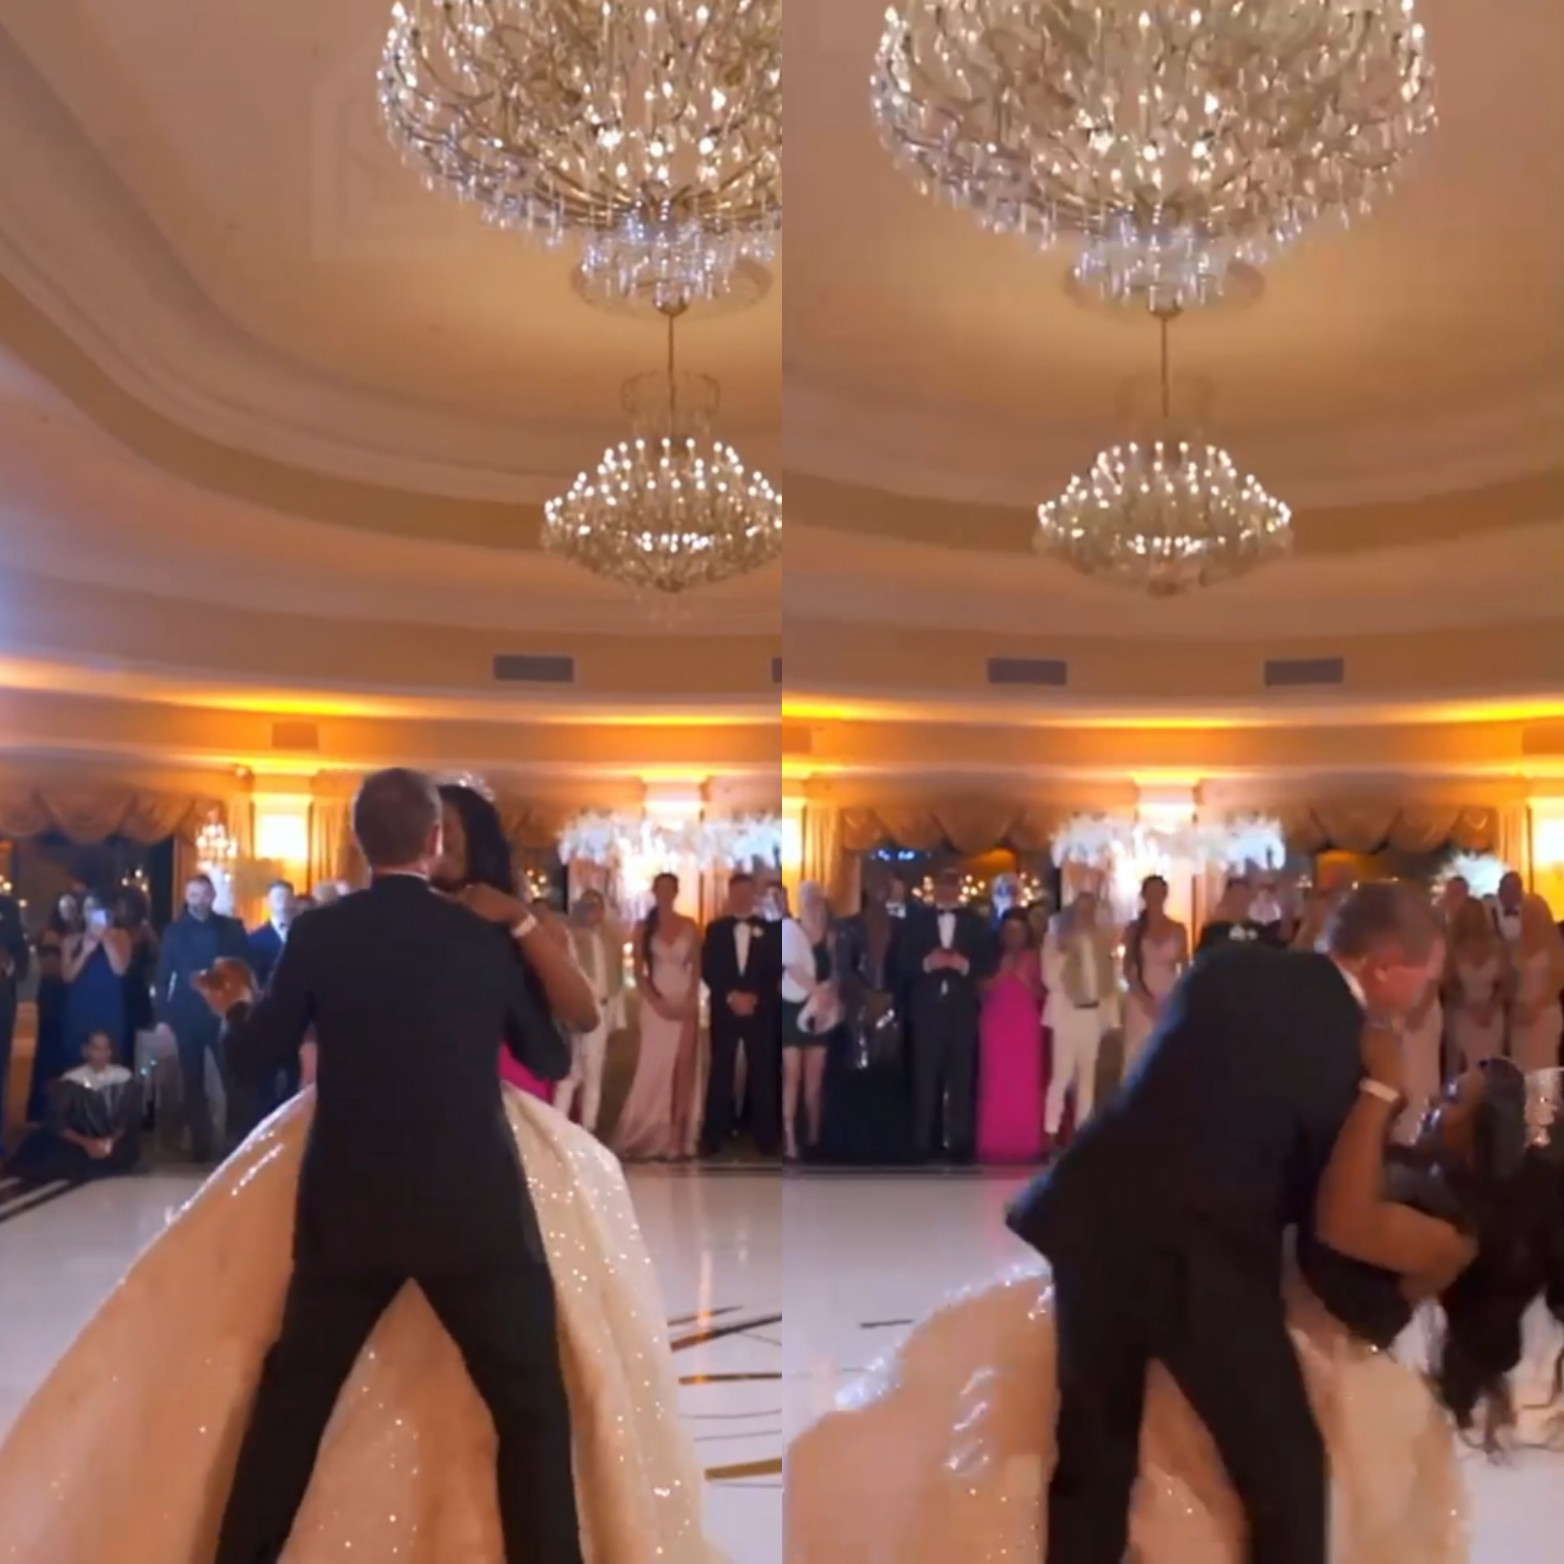 Couple Suffer Embarrassing Fall During First Dance At Wedding